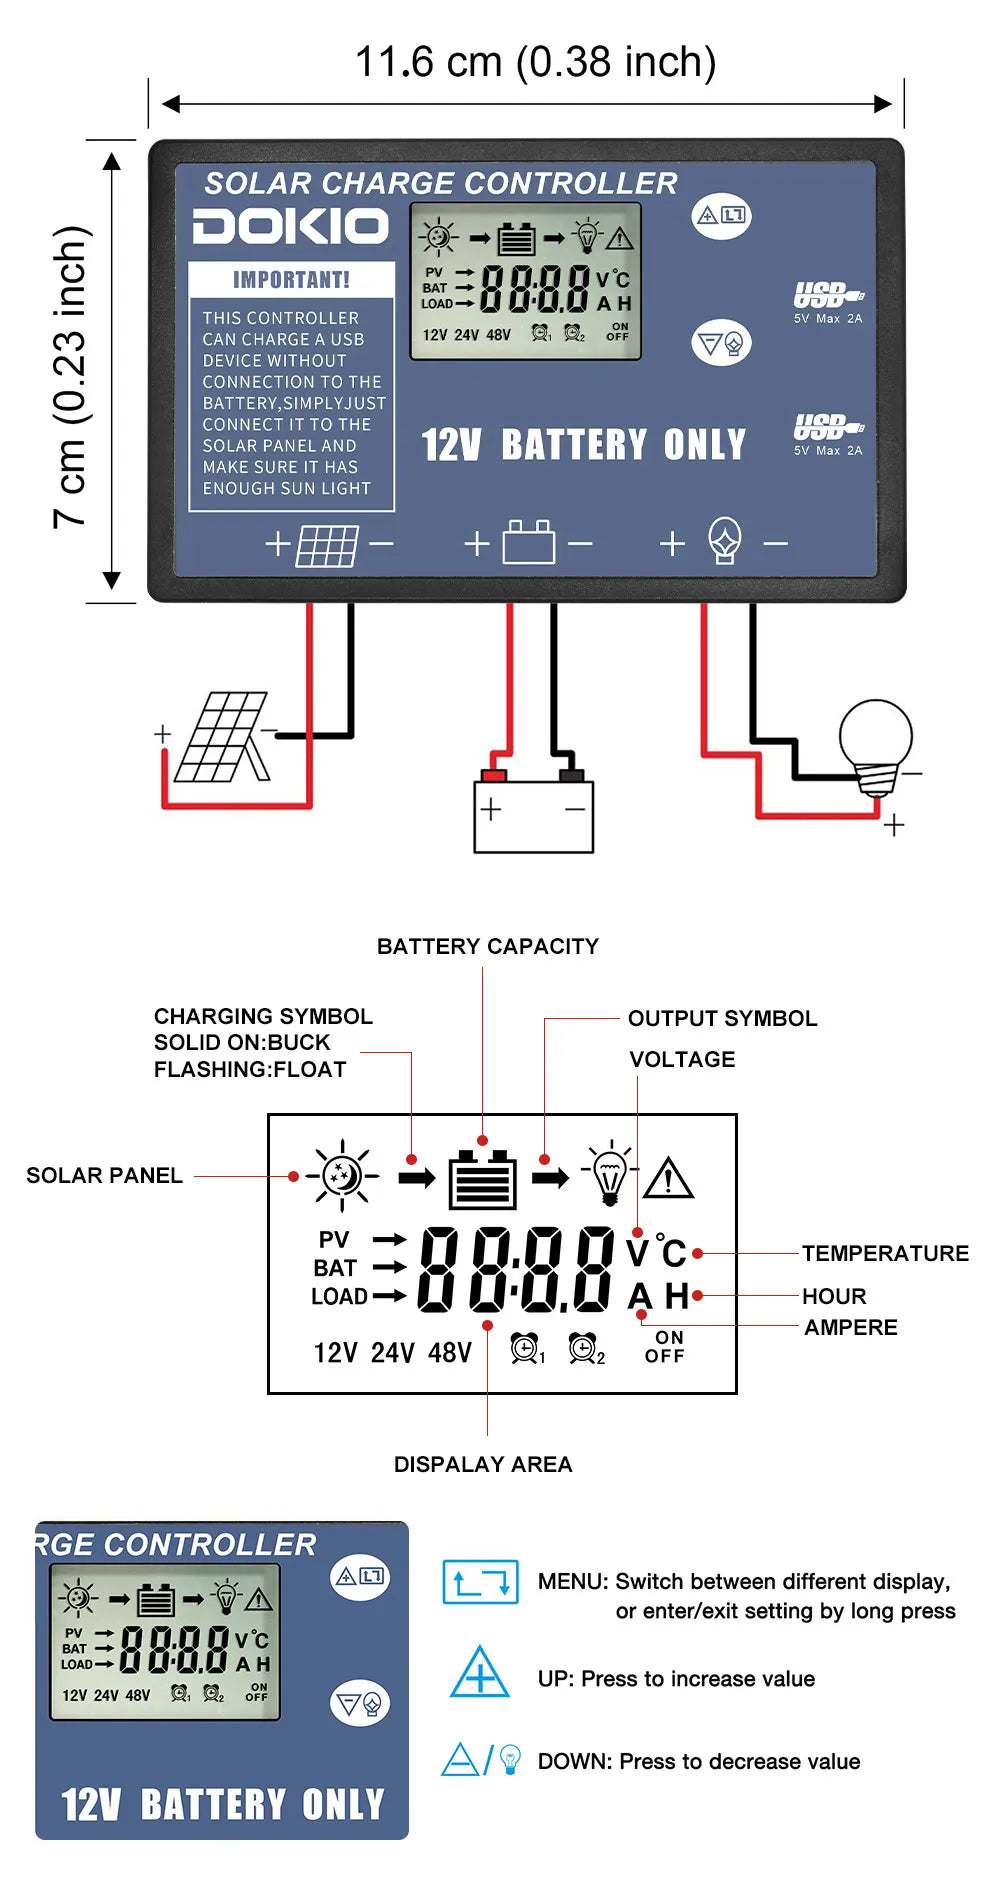 DOKIO 18V 100W 300W Portable Ffolding Solar Panel, DOKIO's Solar Charge Controller features easy interface with key functions: USB charging, max 2A output, and battery status indicator lights.